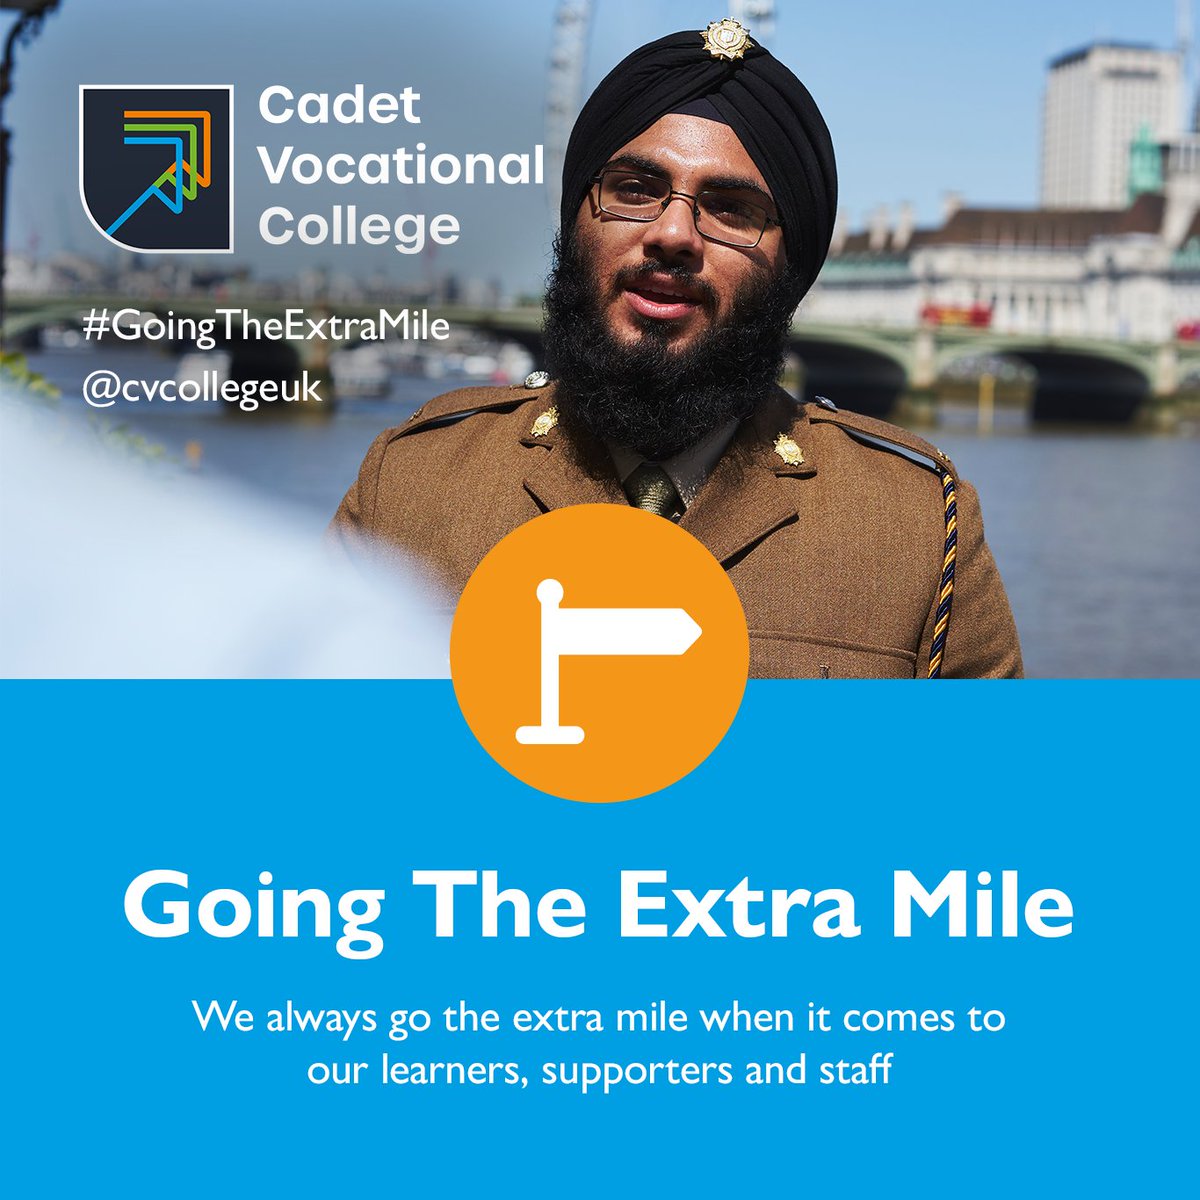 We're dedicated to going the extra mile for our learners 🚀 Your success is our success 💪 Need assistance? Our Learning Support Services team is just a call away during office hours at ☎️ 01276 601701 

#CadetVocationalCollege #CVCollegeUK #GoingTheExtraMile #SkillsForLife